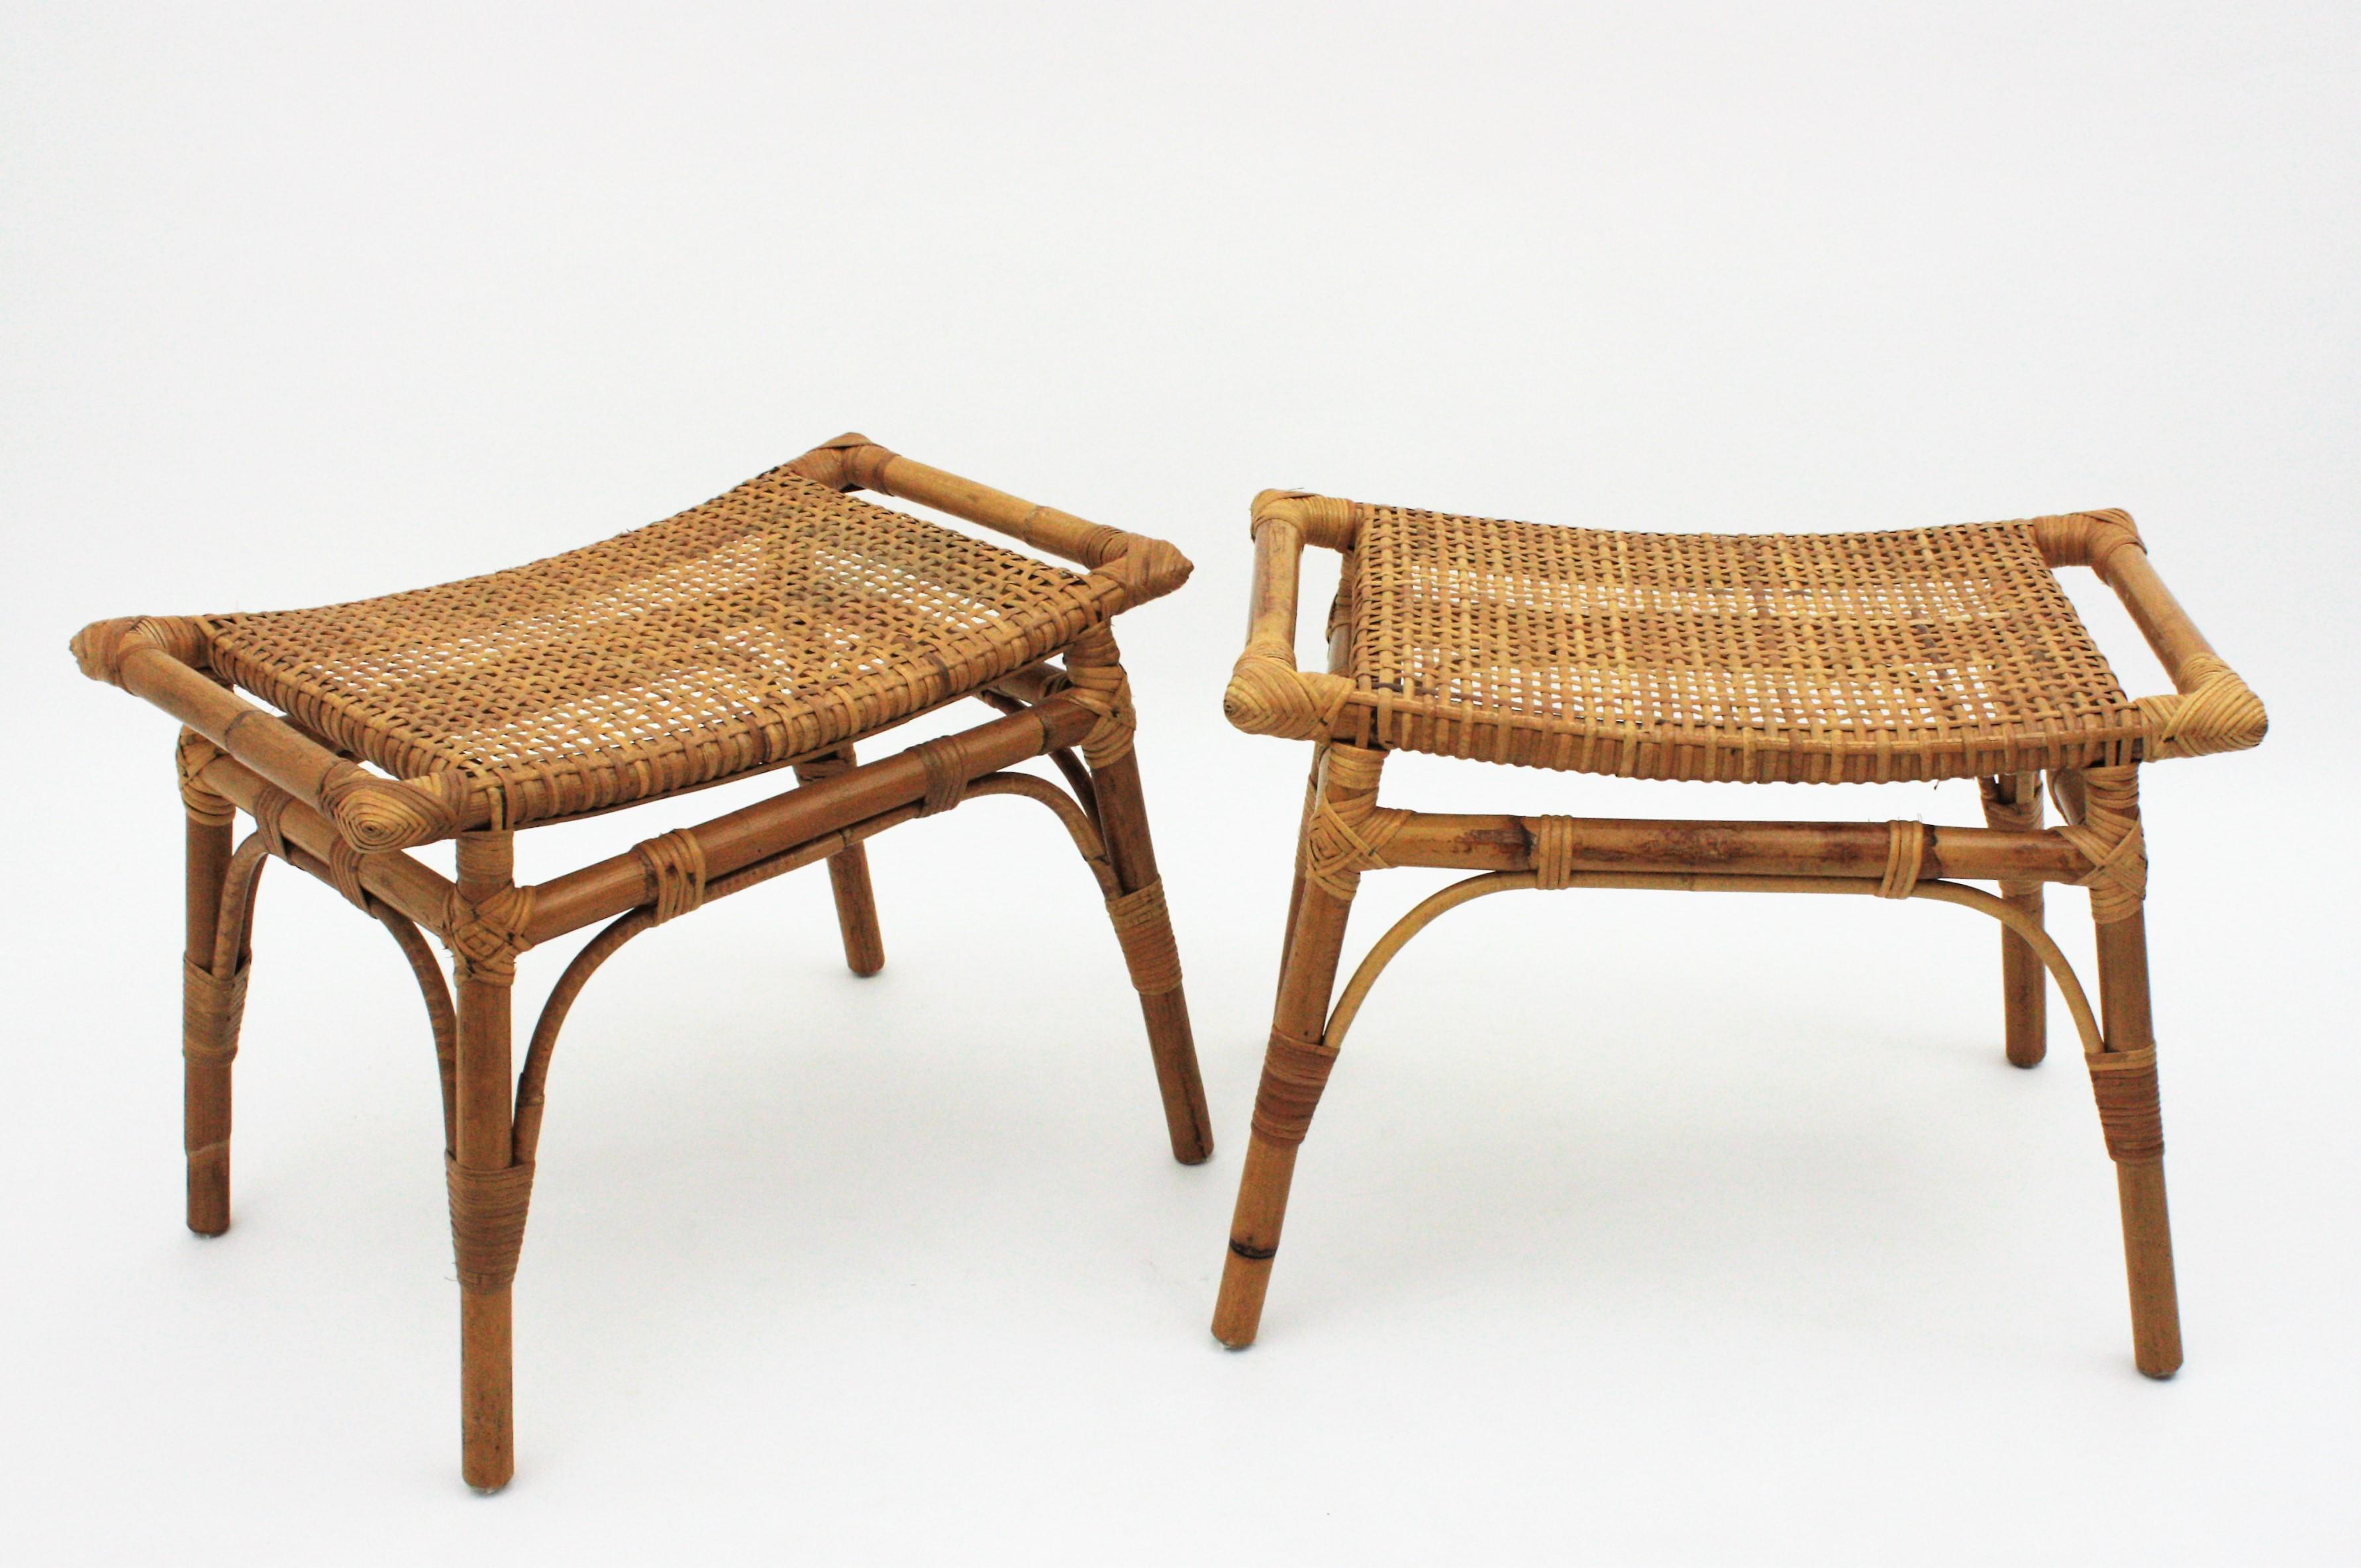 Pair of Bamboo Stools, Benches or Ottoman with Woven Wicker Cane Seats 4